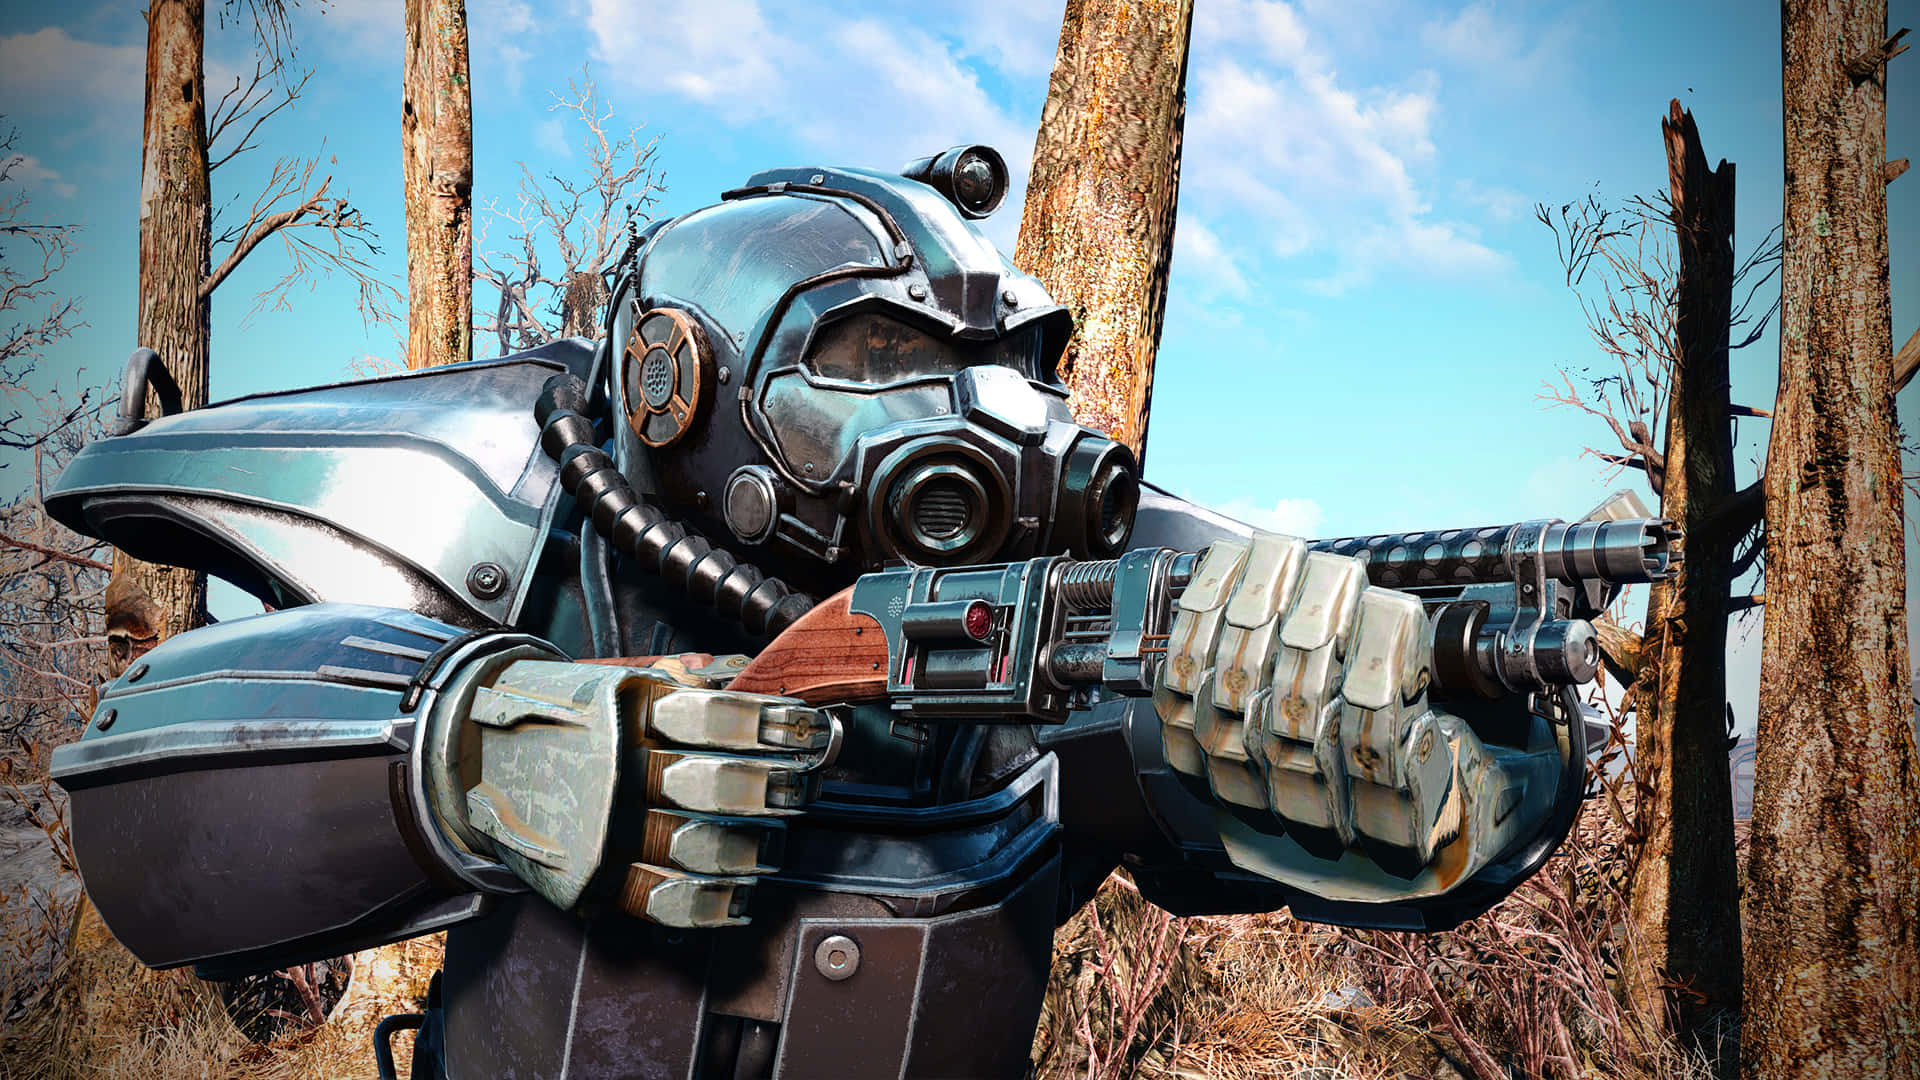 Fallout 4 Power Armor in Action Wallpaper